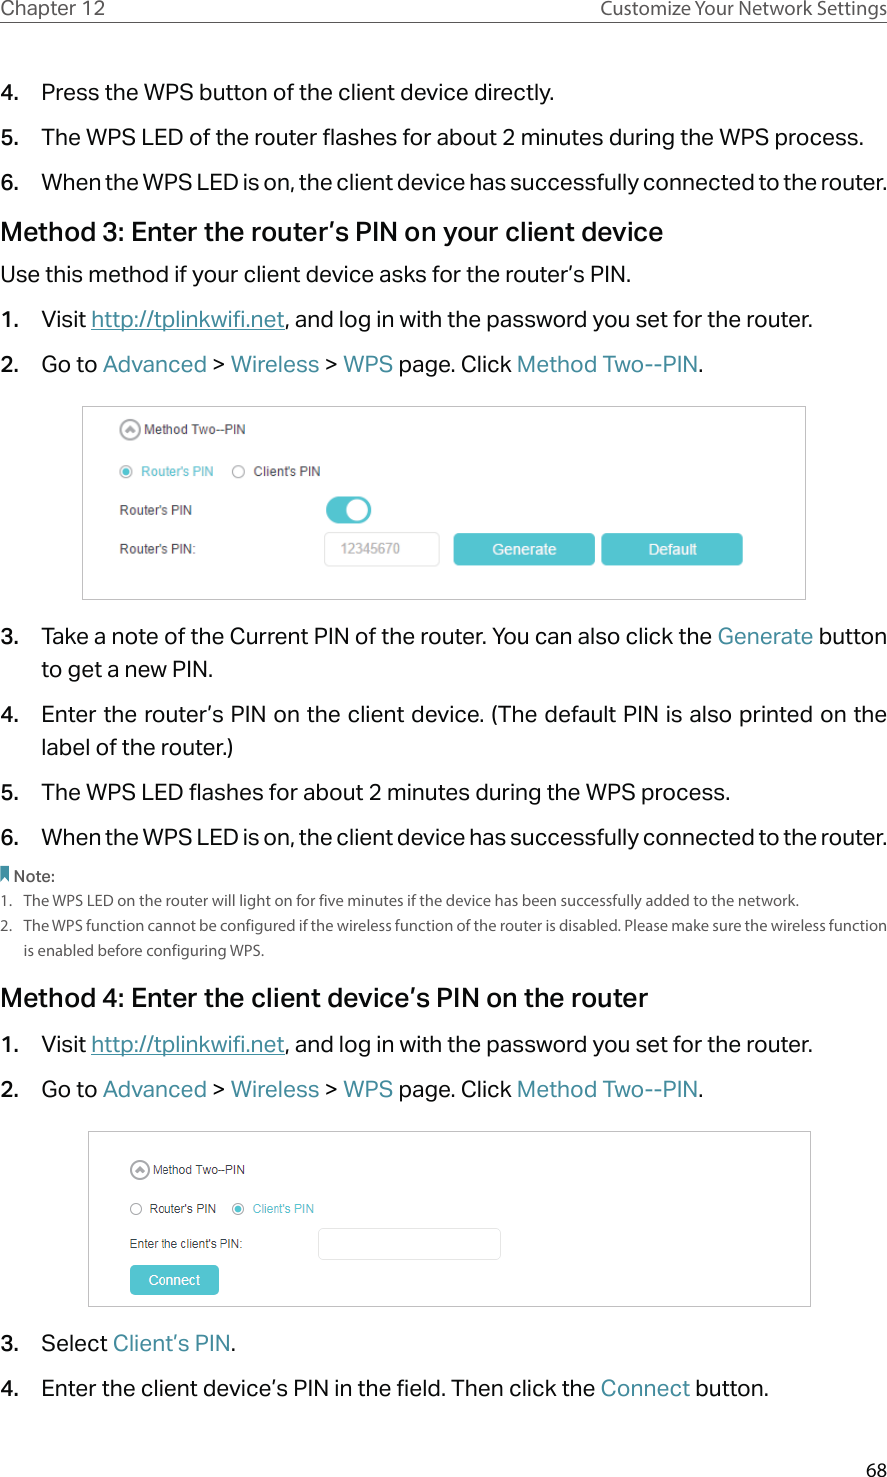 68Chapter 12 Customize Your Network Settings4.  Press the WPS button of the client device directly. 5.  The WPS LED of the router flashes for about 2 minutes during the WPS process. 6.  When the WPS LED is on, the client device has successfully connected to the router. Method 3: Enter the router’s PIN on your client deviceUse this method if your client device asks for the router’s PIN. 1.  Visit http://tplinkwifi.net, and log in with the password you set for the router. 2.  Go to Advanced &gt; Wireless &gt; WPS page. Click Method Two--PIN.3.  Take a note of the Current PIN of the router. You can also click the Generate button to get a new PIN.4.  Enter the router’s PIN on the client device. (The default PIN is also printed on the label of the router.)5.  The WPS LED flashes for about 2 minutes during the WPS process. 6.  When the WPS LED is on, the client device has successfully connected to the router. Note:1.  The WPS LED on the router will light on for five minutes if the device has been successfully added to the network.2.  The WPS function cannot be configured if the wireless function of the router is disabled. Please make sure the wireless function is enabled before configuring WPS.Method 4: Enter the client device’s PIN on the router1.  Visit http://tplinkwifi.net, and log in with the password you set for the router.2.  Go to Advanced &gt; Wireless &gt; WPS page. Click Method Two--PIN.  3.  Select Client’s PIN.4.  Enter the client device’s PIN in the field. Then click the Connect button.